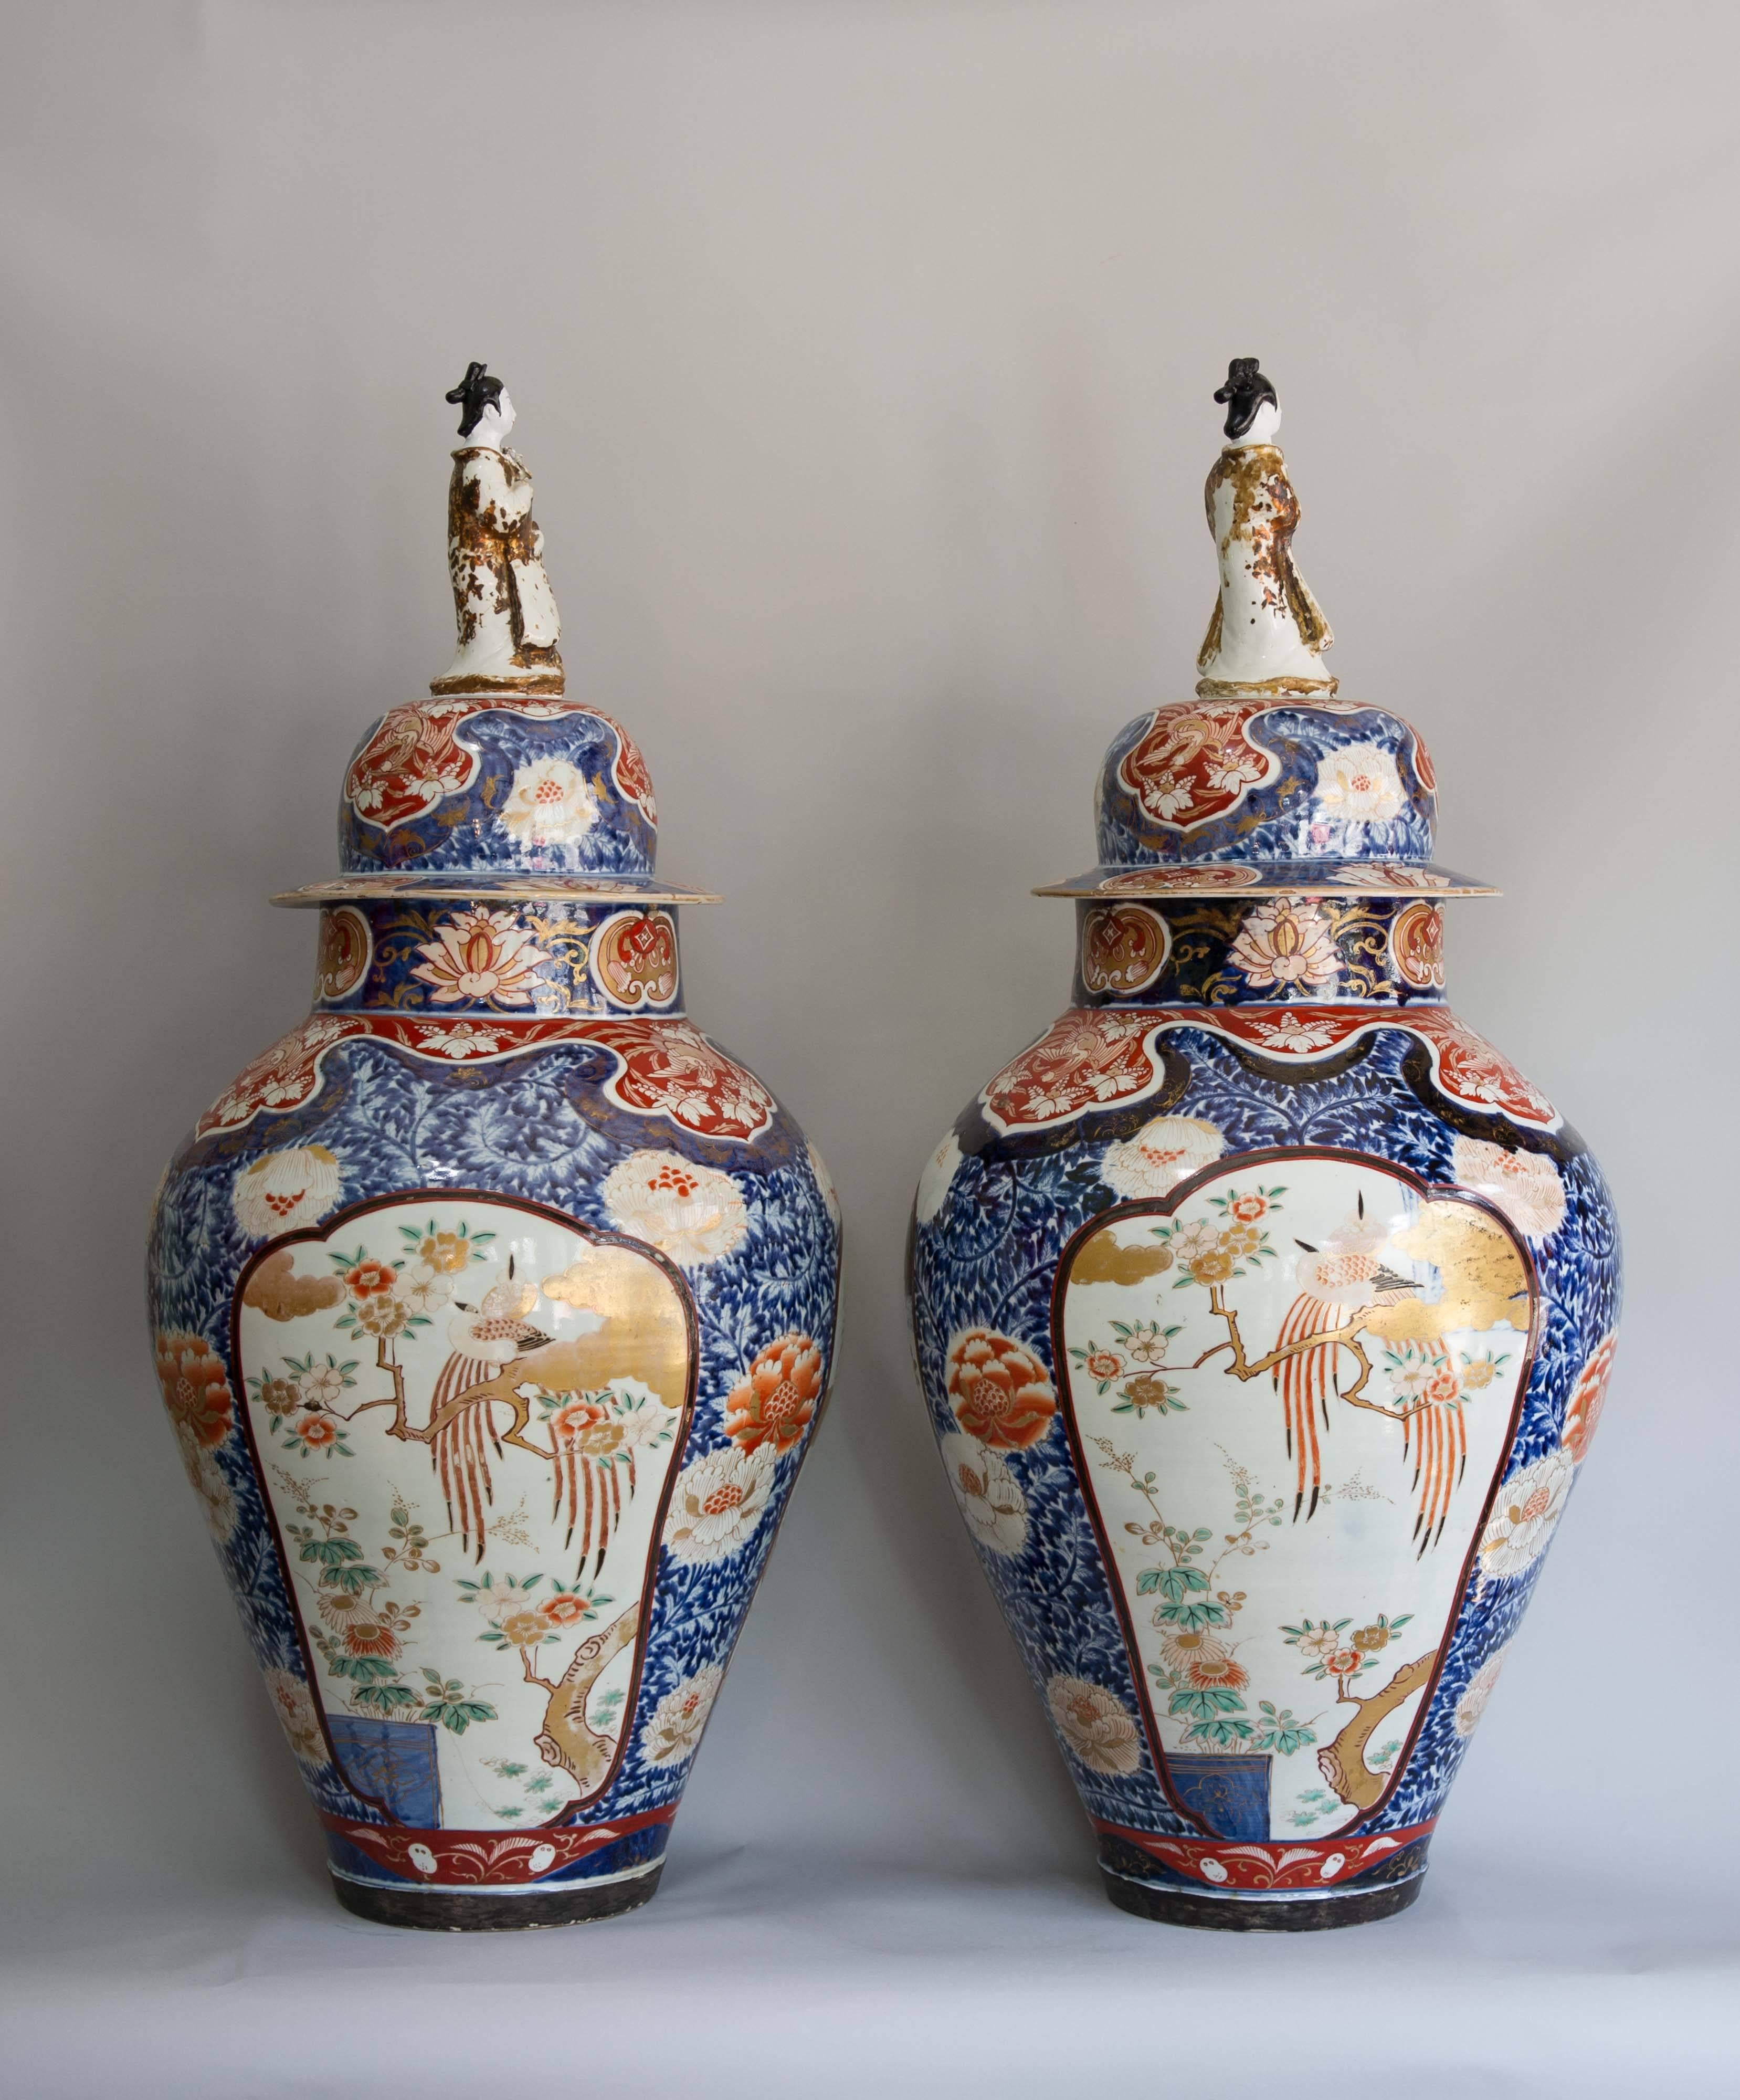 A massive pair of exceptional Japanese Imari vases almost certainly made for a palace. Each is decorated with three beautifully composed landscape panels. Each panel, framed within a cartouche, shows birds of paradise, cherry blossom and other